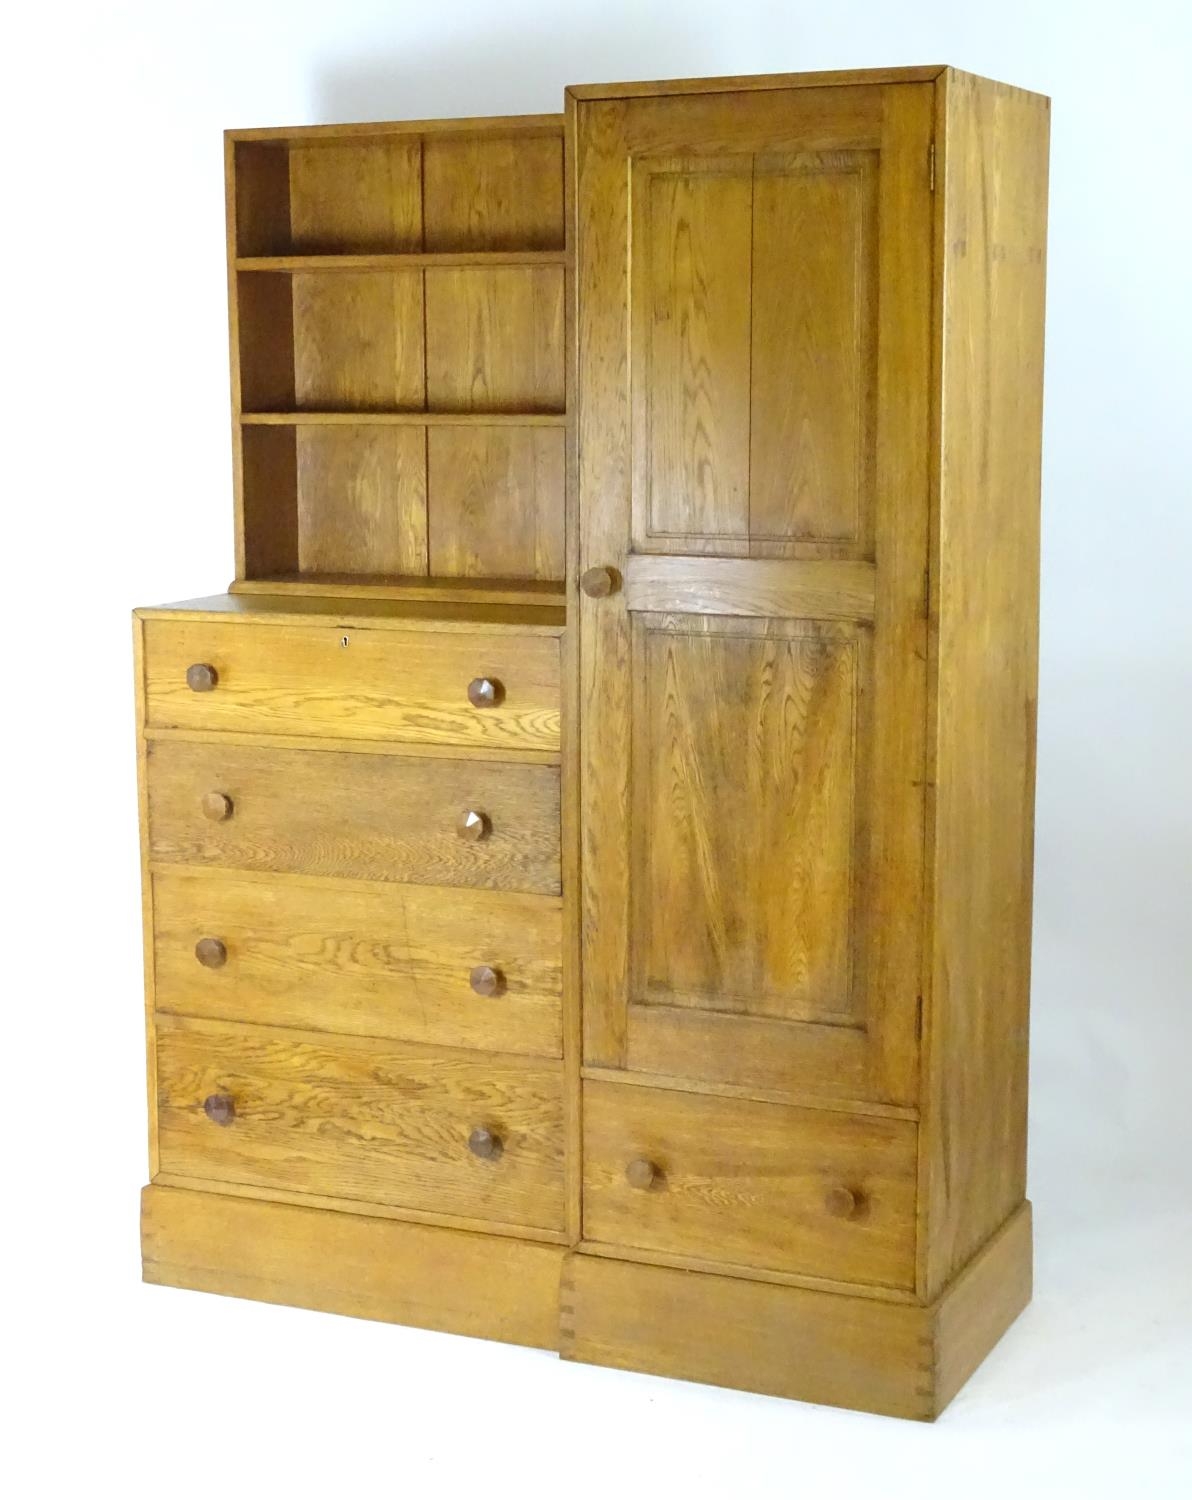 An early / mid 20thC oak combination wardrobe to a design by Peter Waals, Loughborough University. - Image 2 of 18